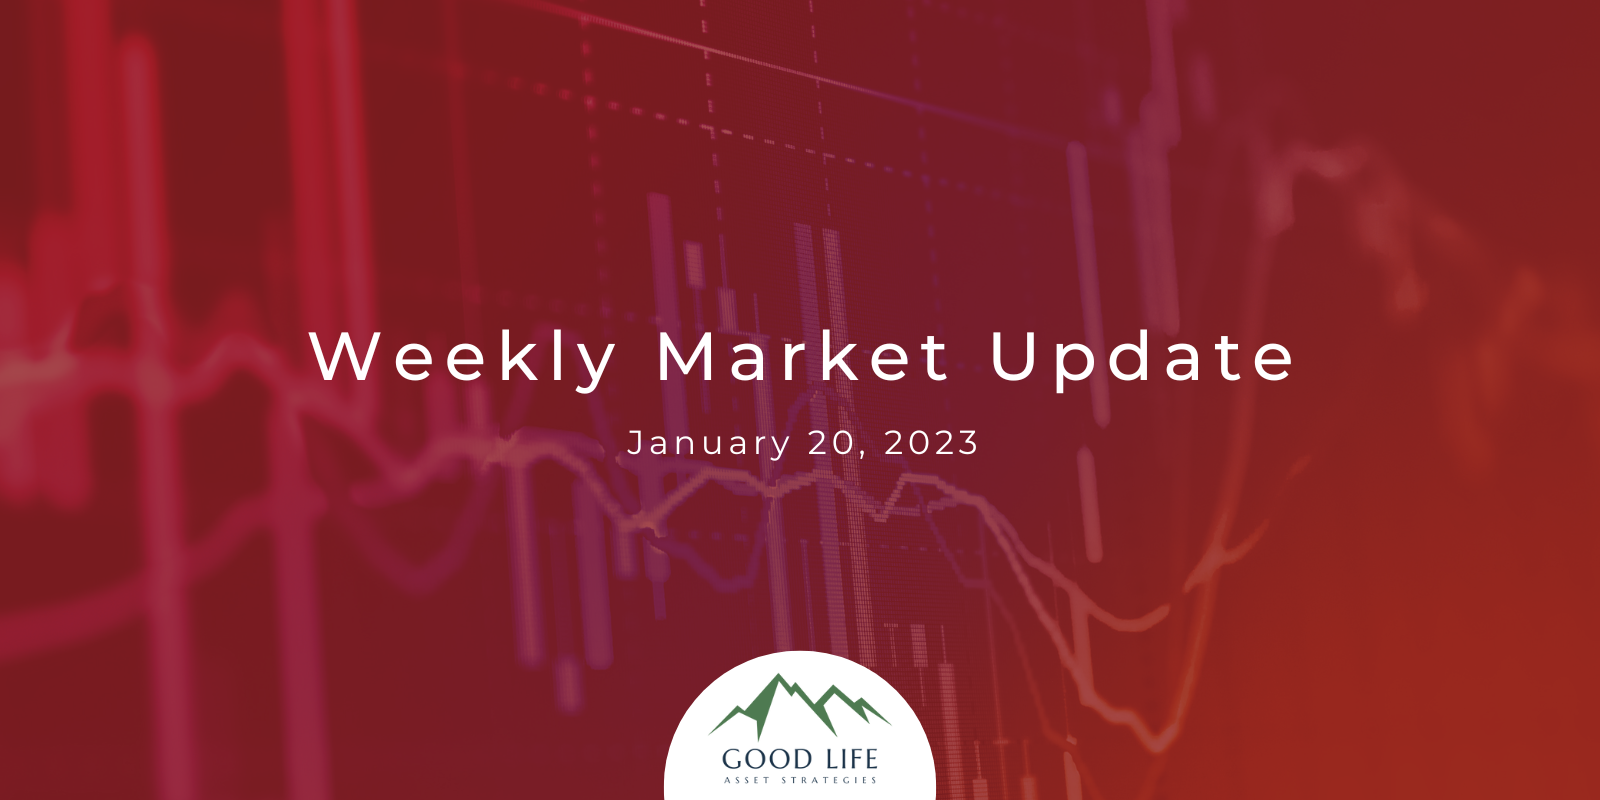 Pullback is the topic in this week's market update